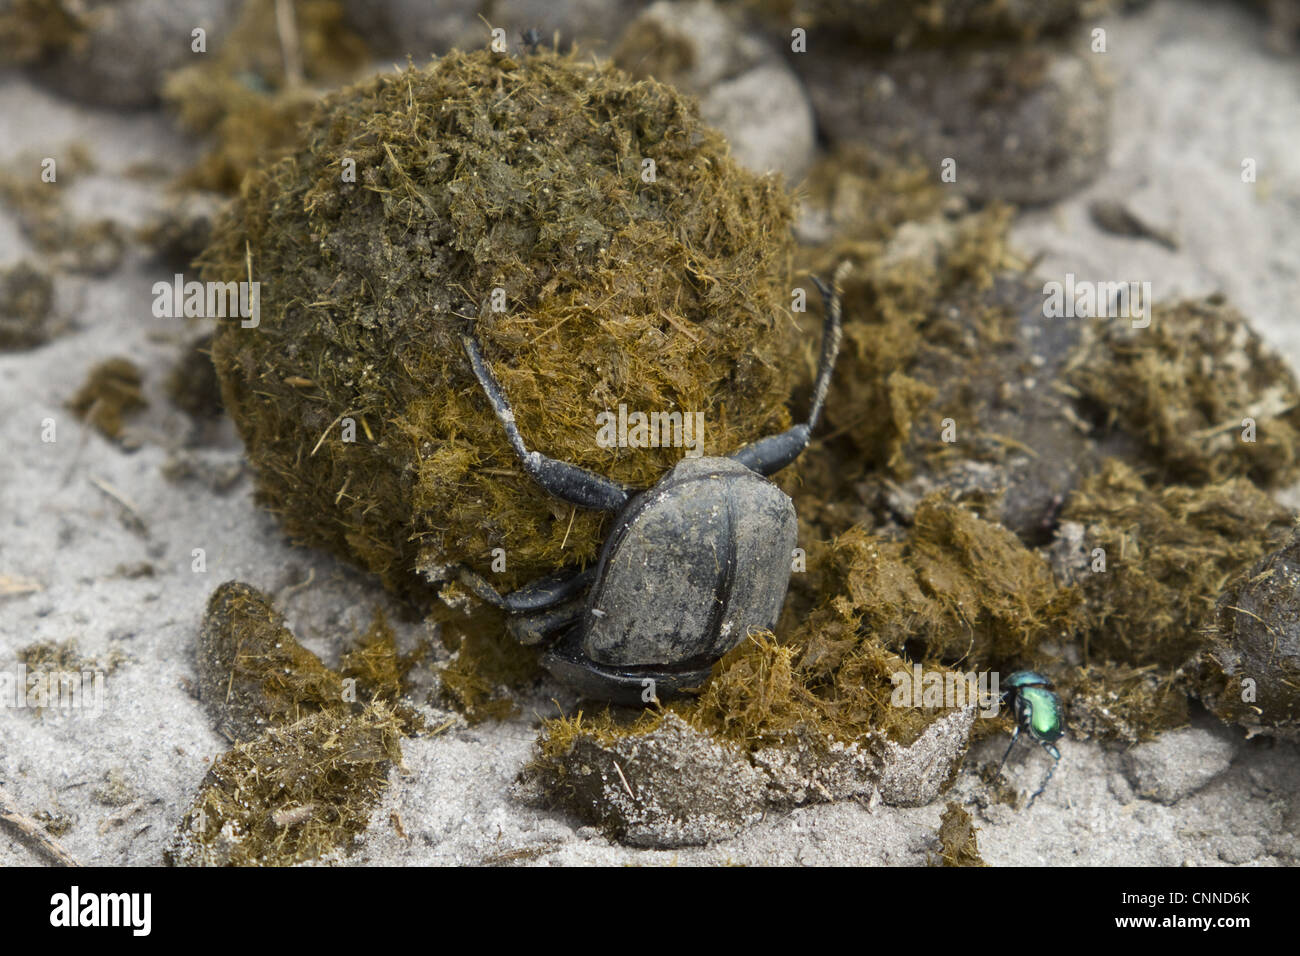 Dung beetle making a dung ball to roll away and bury with an egg inside Stock Photo